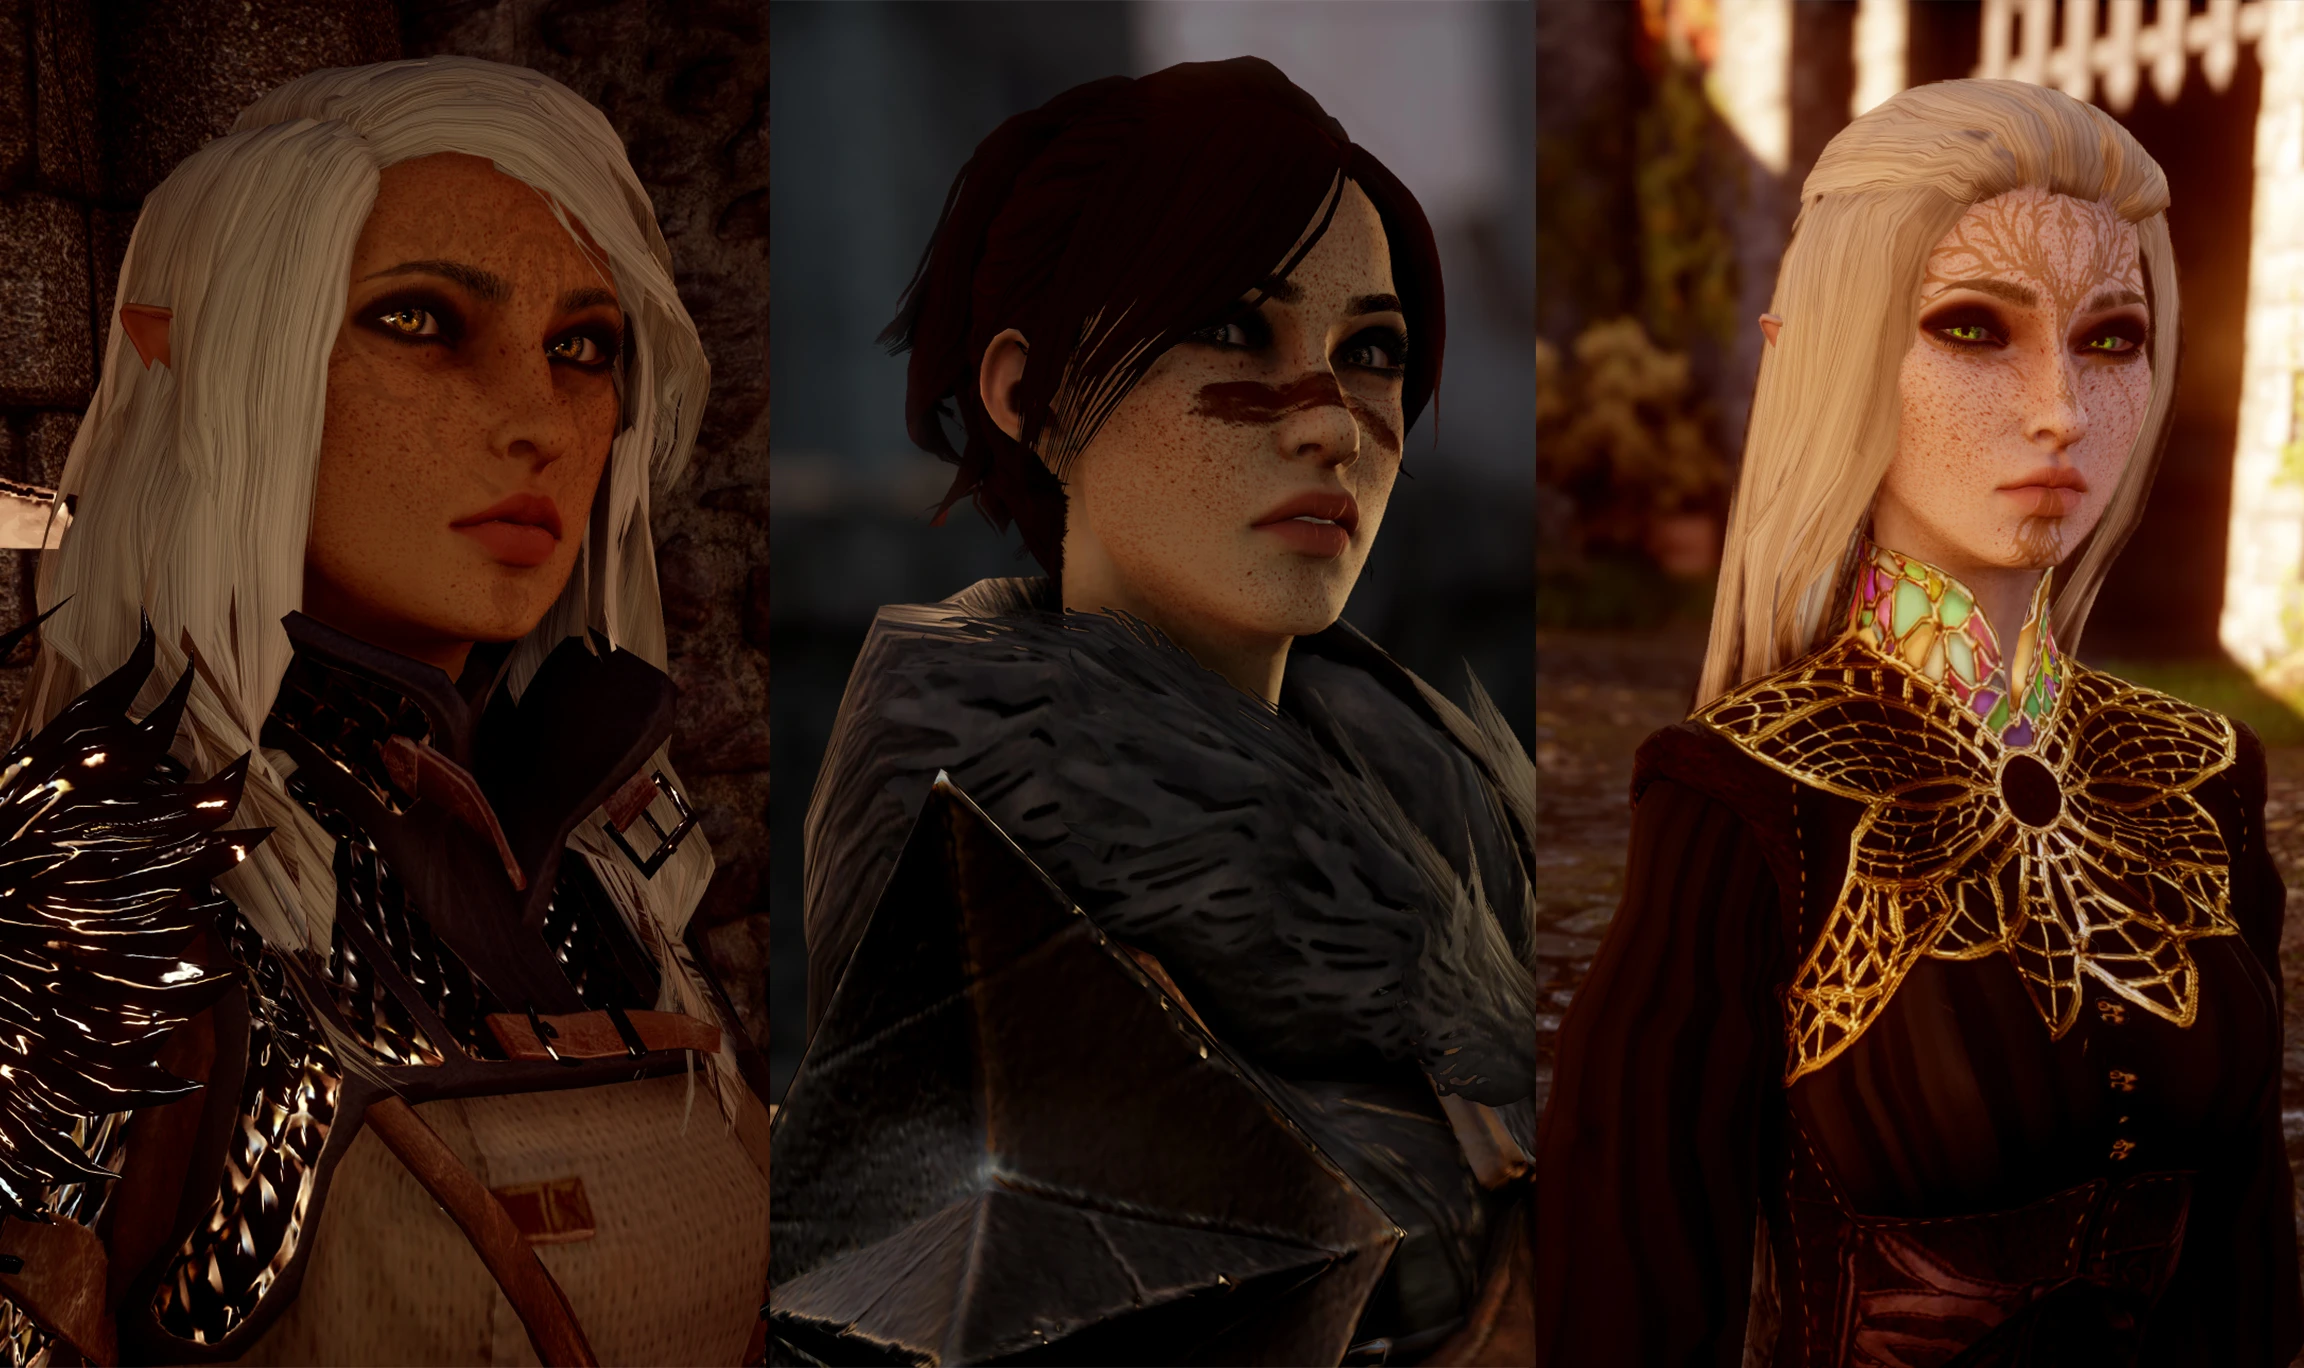 Dragon age inquisition character creator looks different - westcoastklo